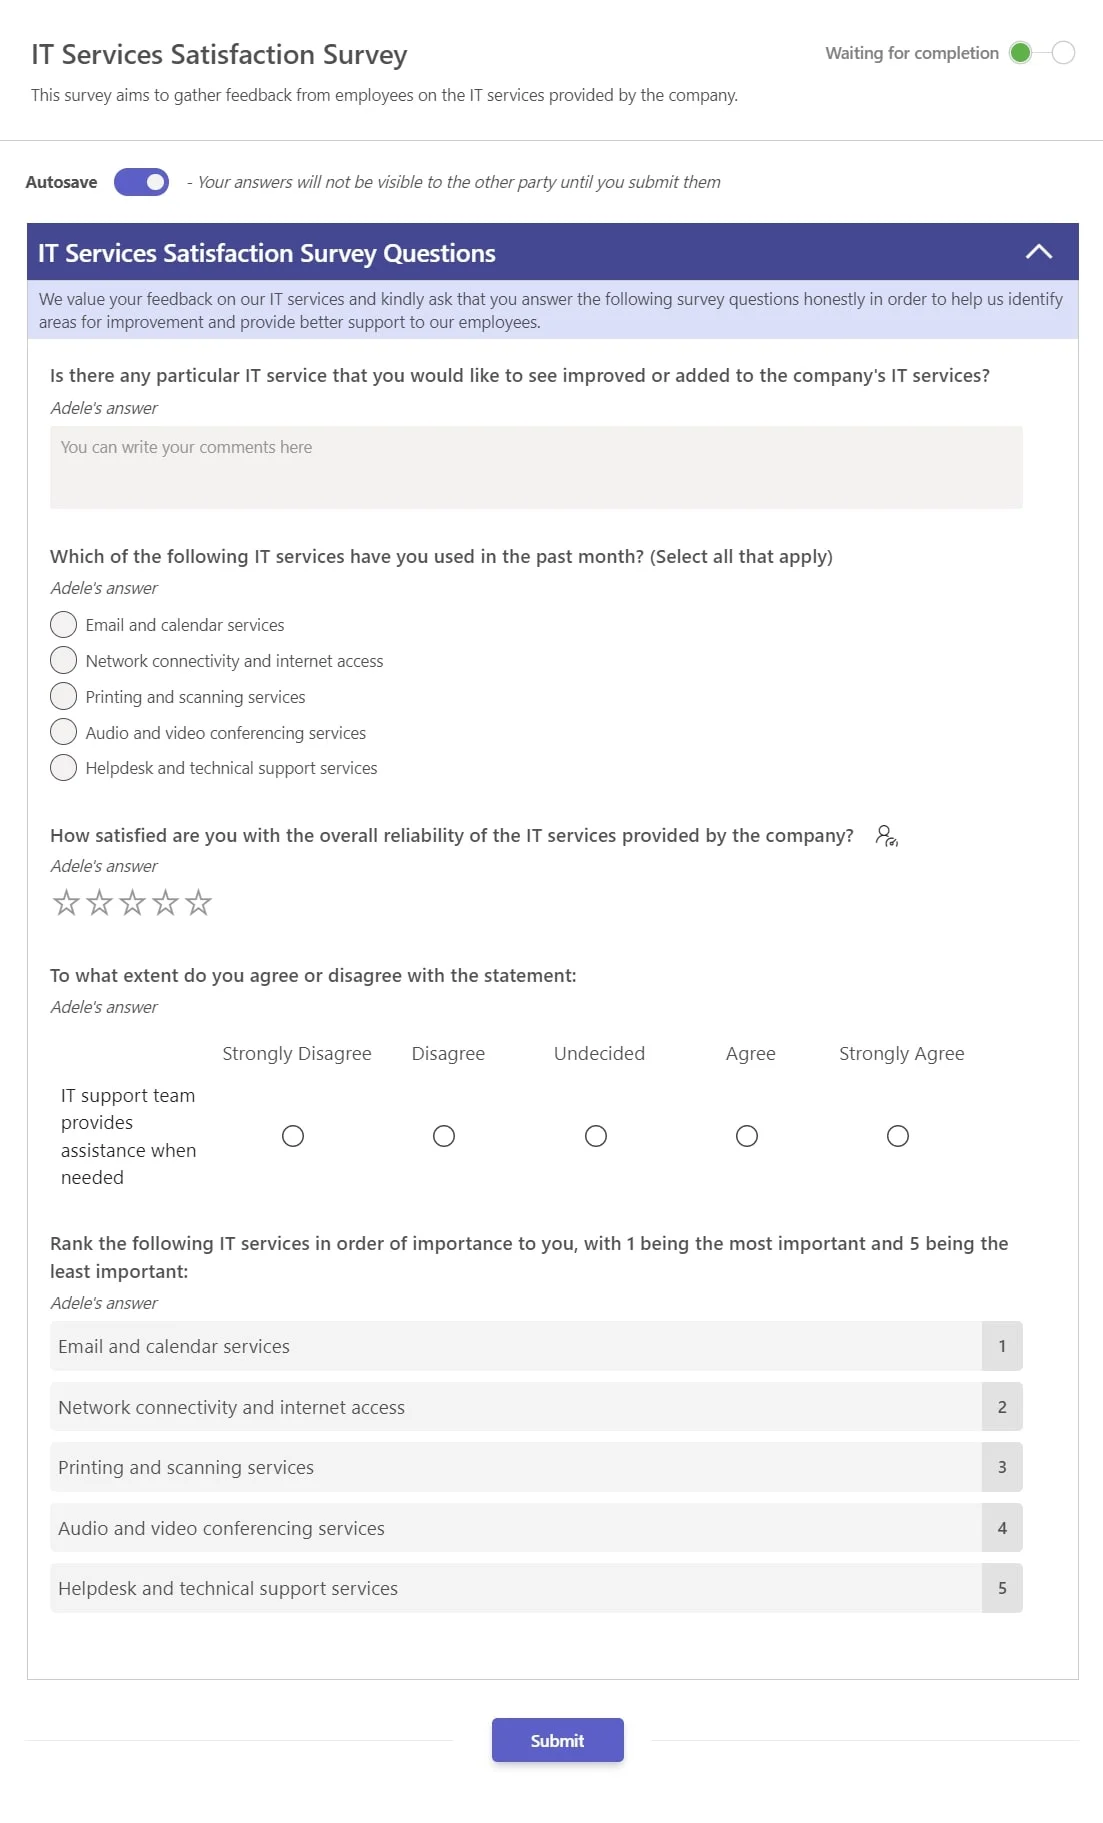 teamflect it services satisfaction survey template with questions